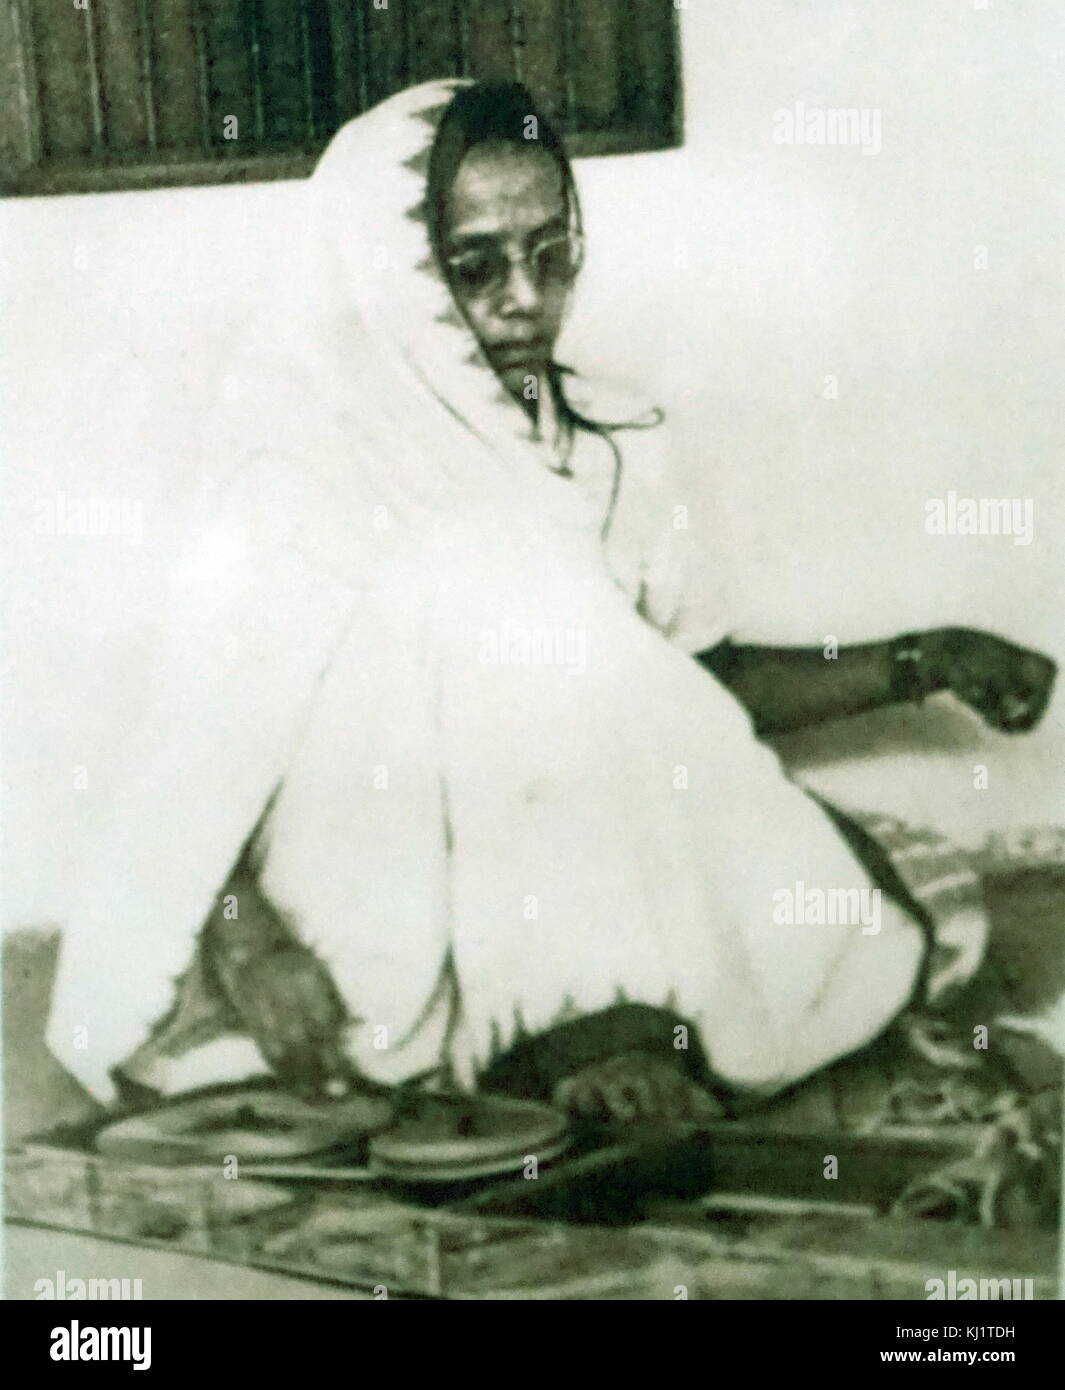 Prabhavati Devi (1906 – 15 April 1973) was at the forefront of freedom struggle in Bihar. She was married to Jayprakash Narayan in October 1920 Stock Photo